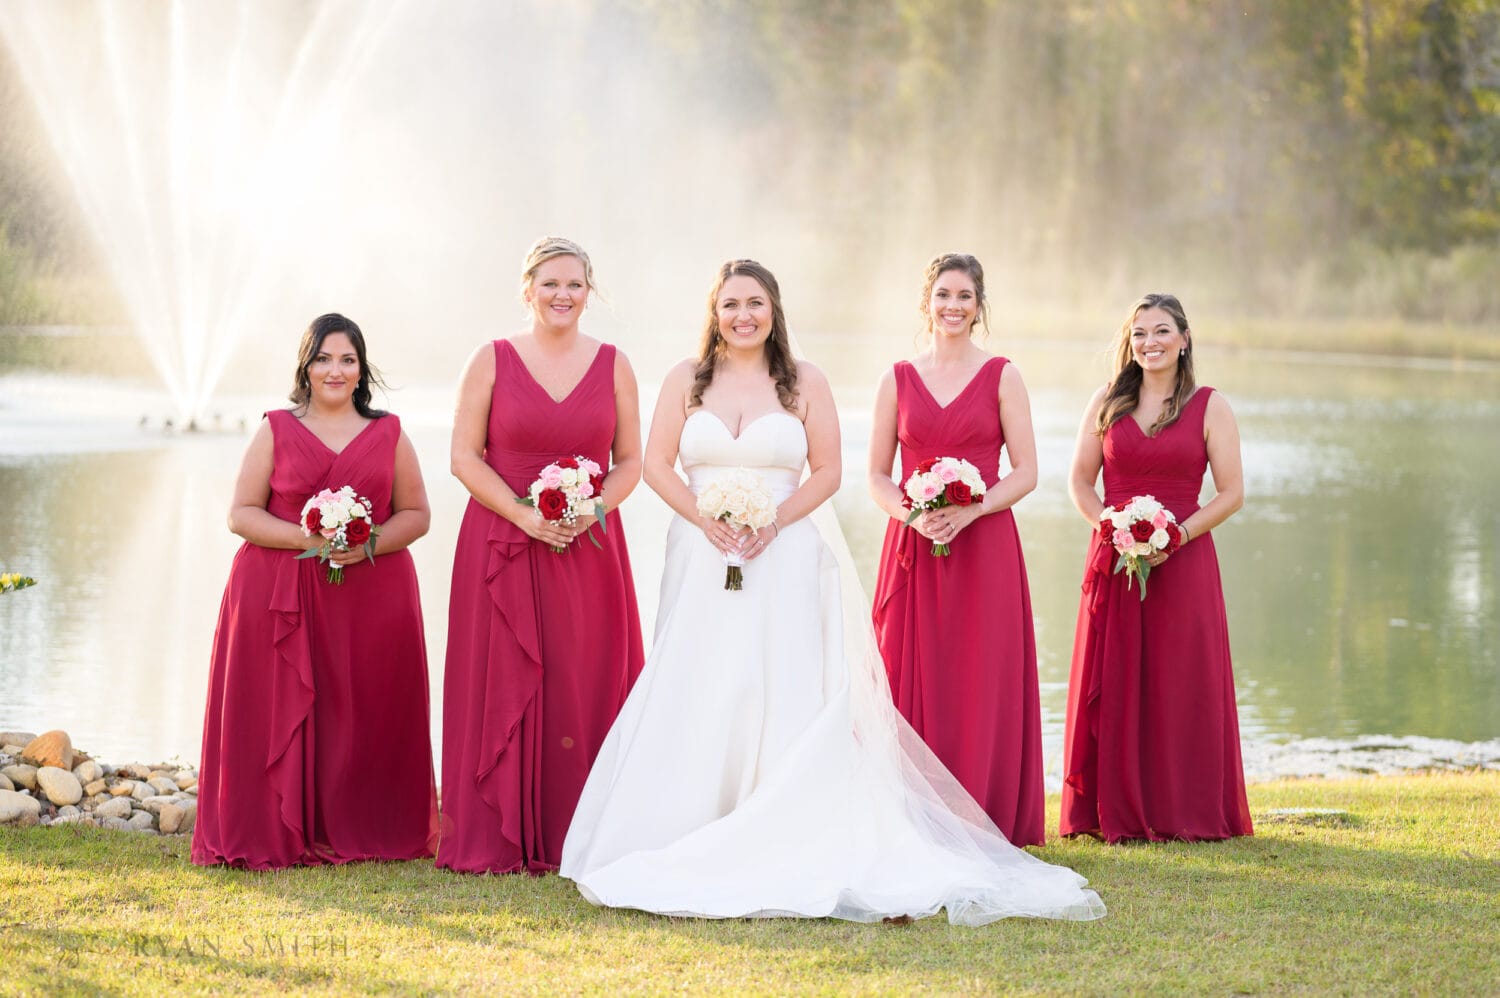 Bride with bridesmaids in front of the fountain - The Venue at White Oaks Farm